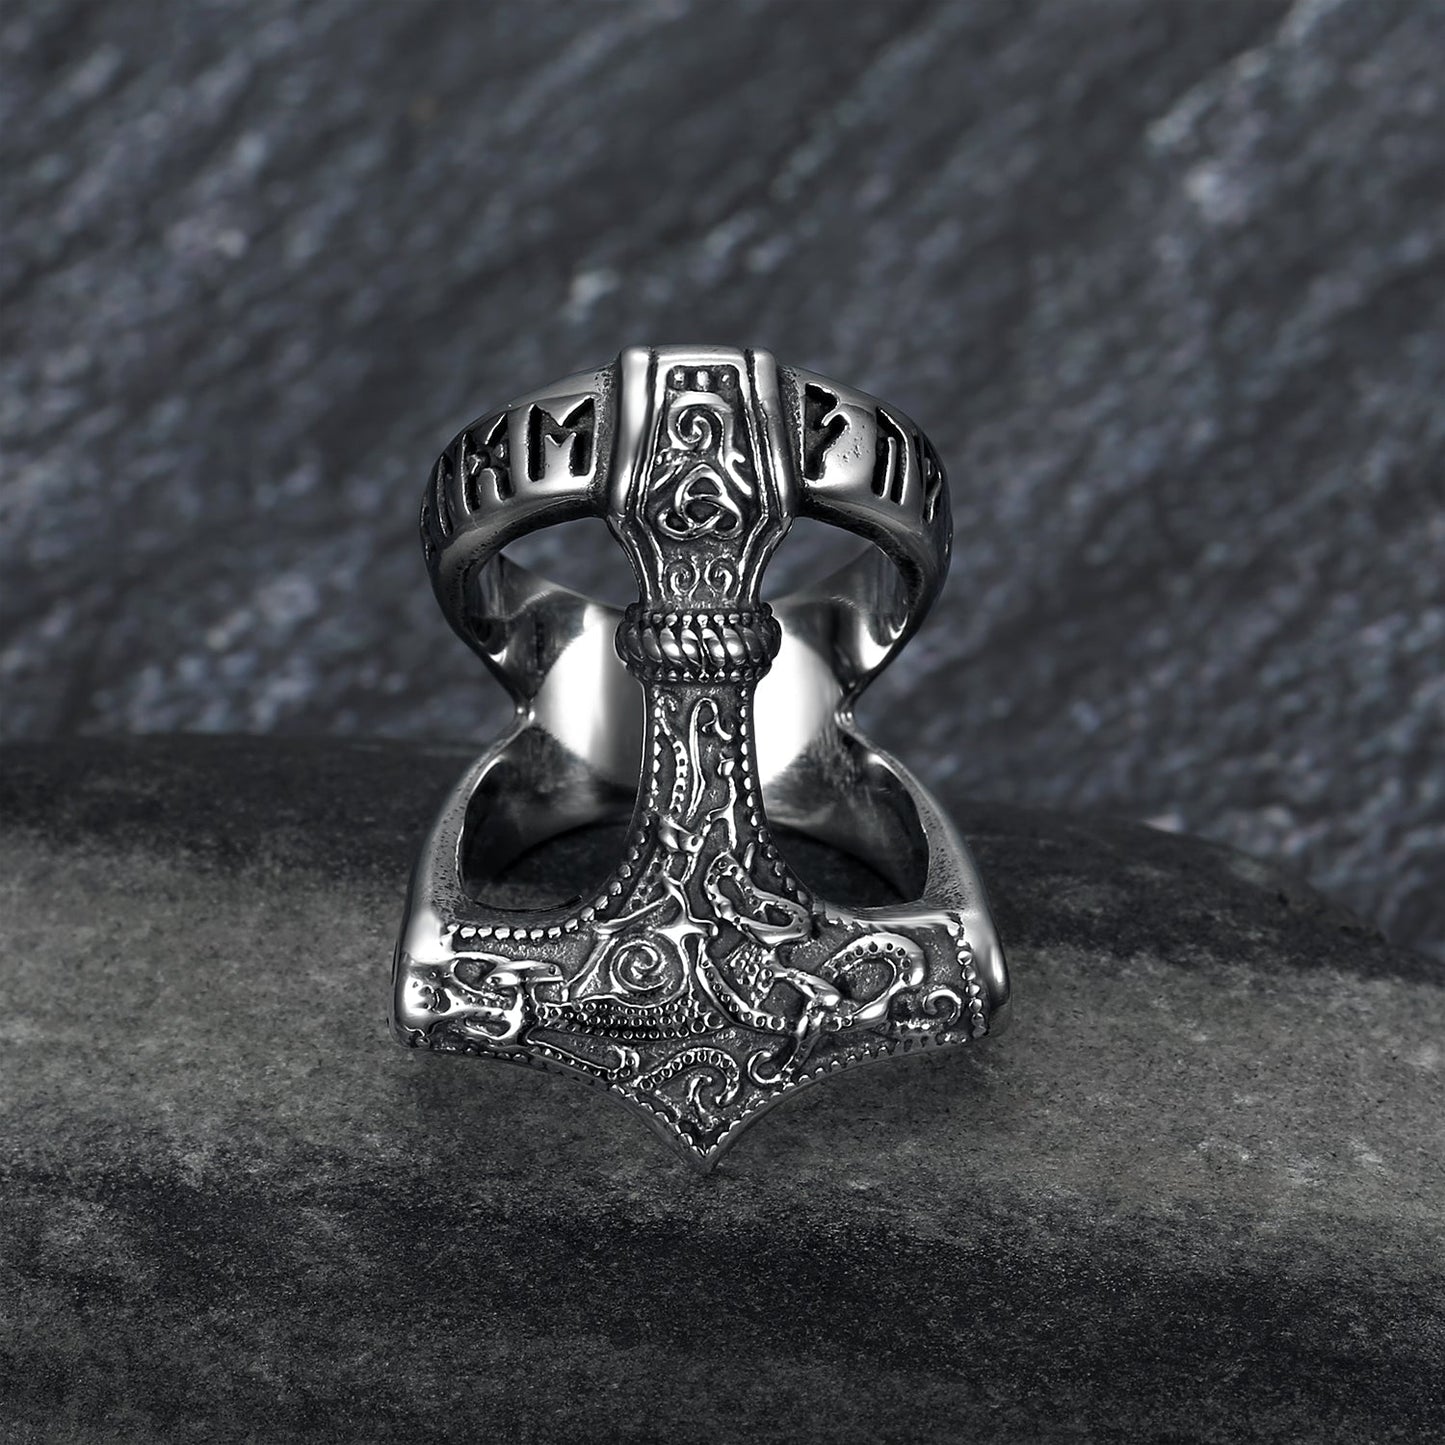 Nordic Pride Handcrafted Stainless Steel Open Thor's Gavel Ring